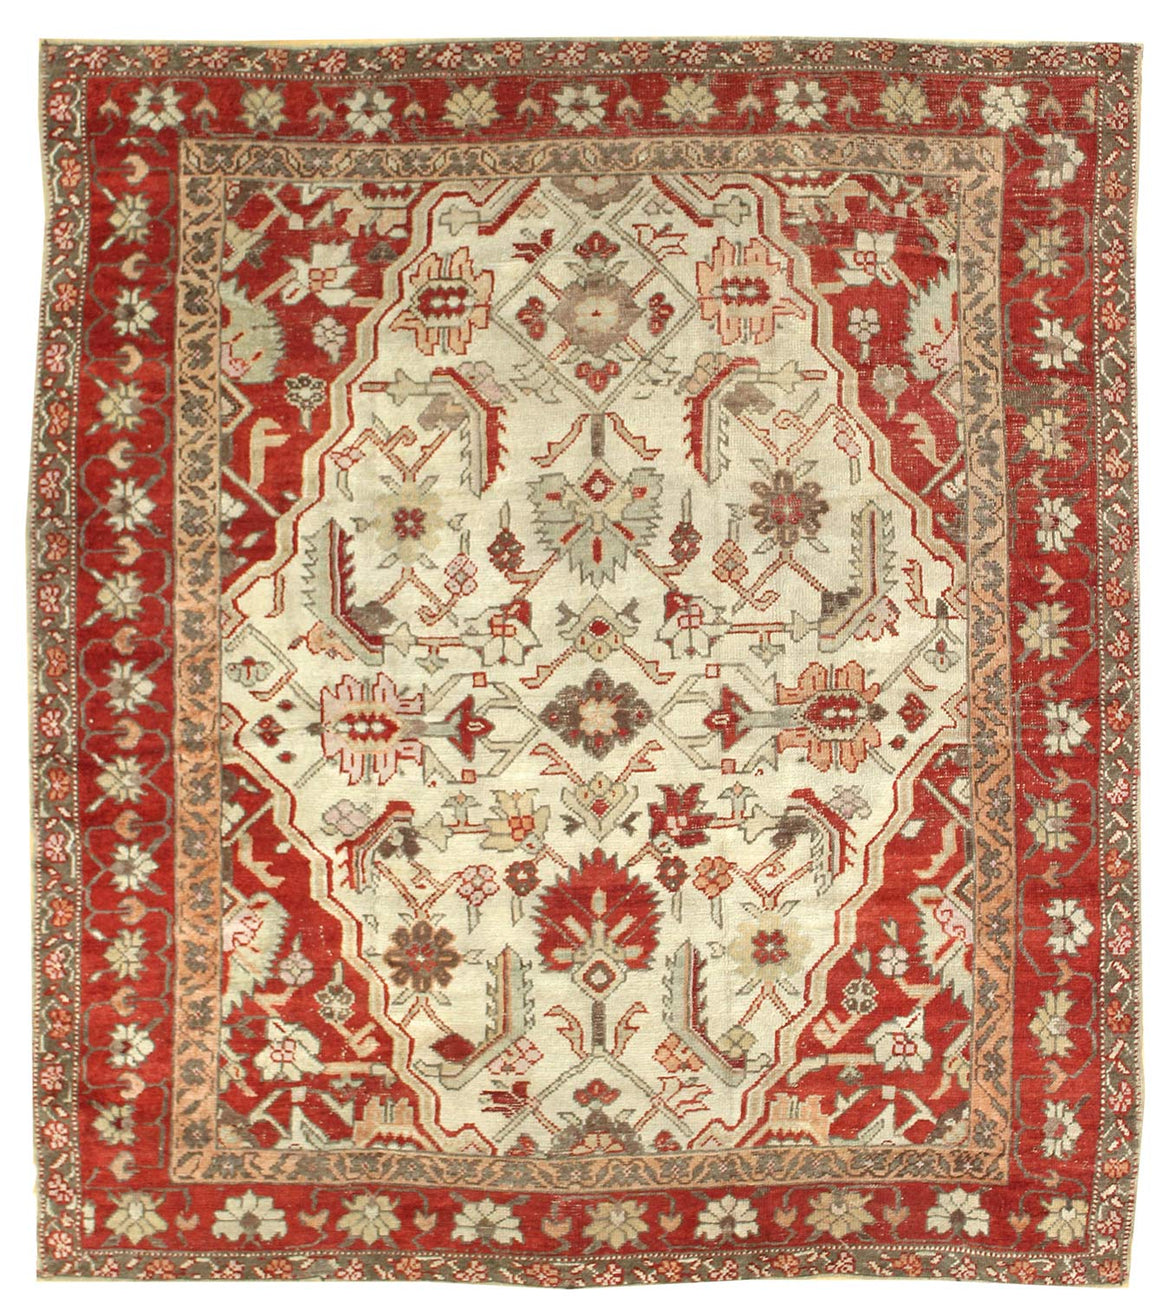 The History of Oushak Rugs and Their Beautiful Features